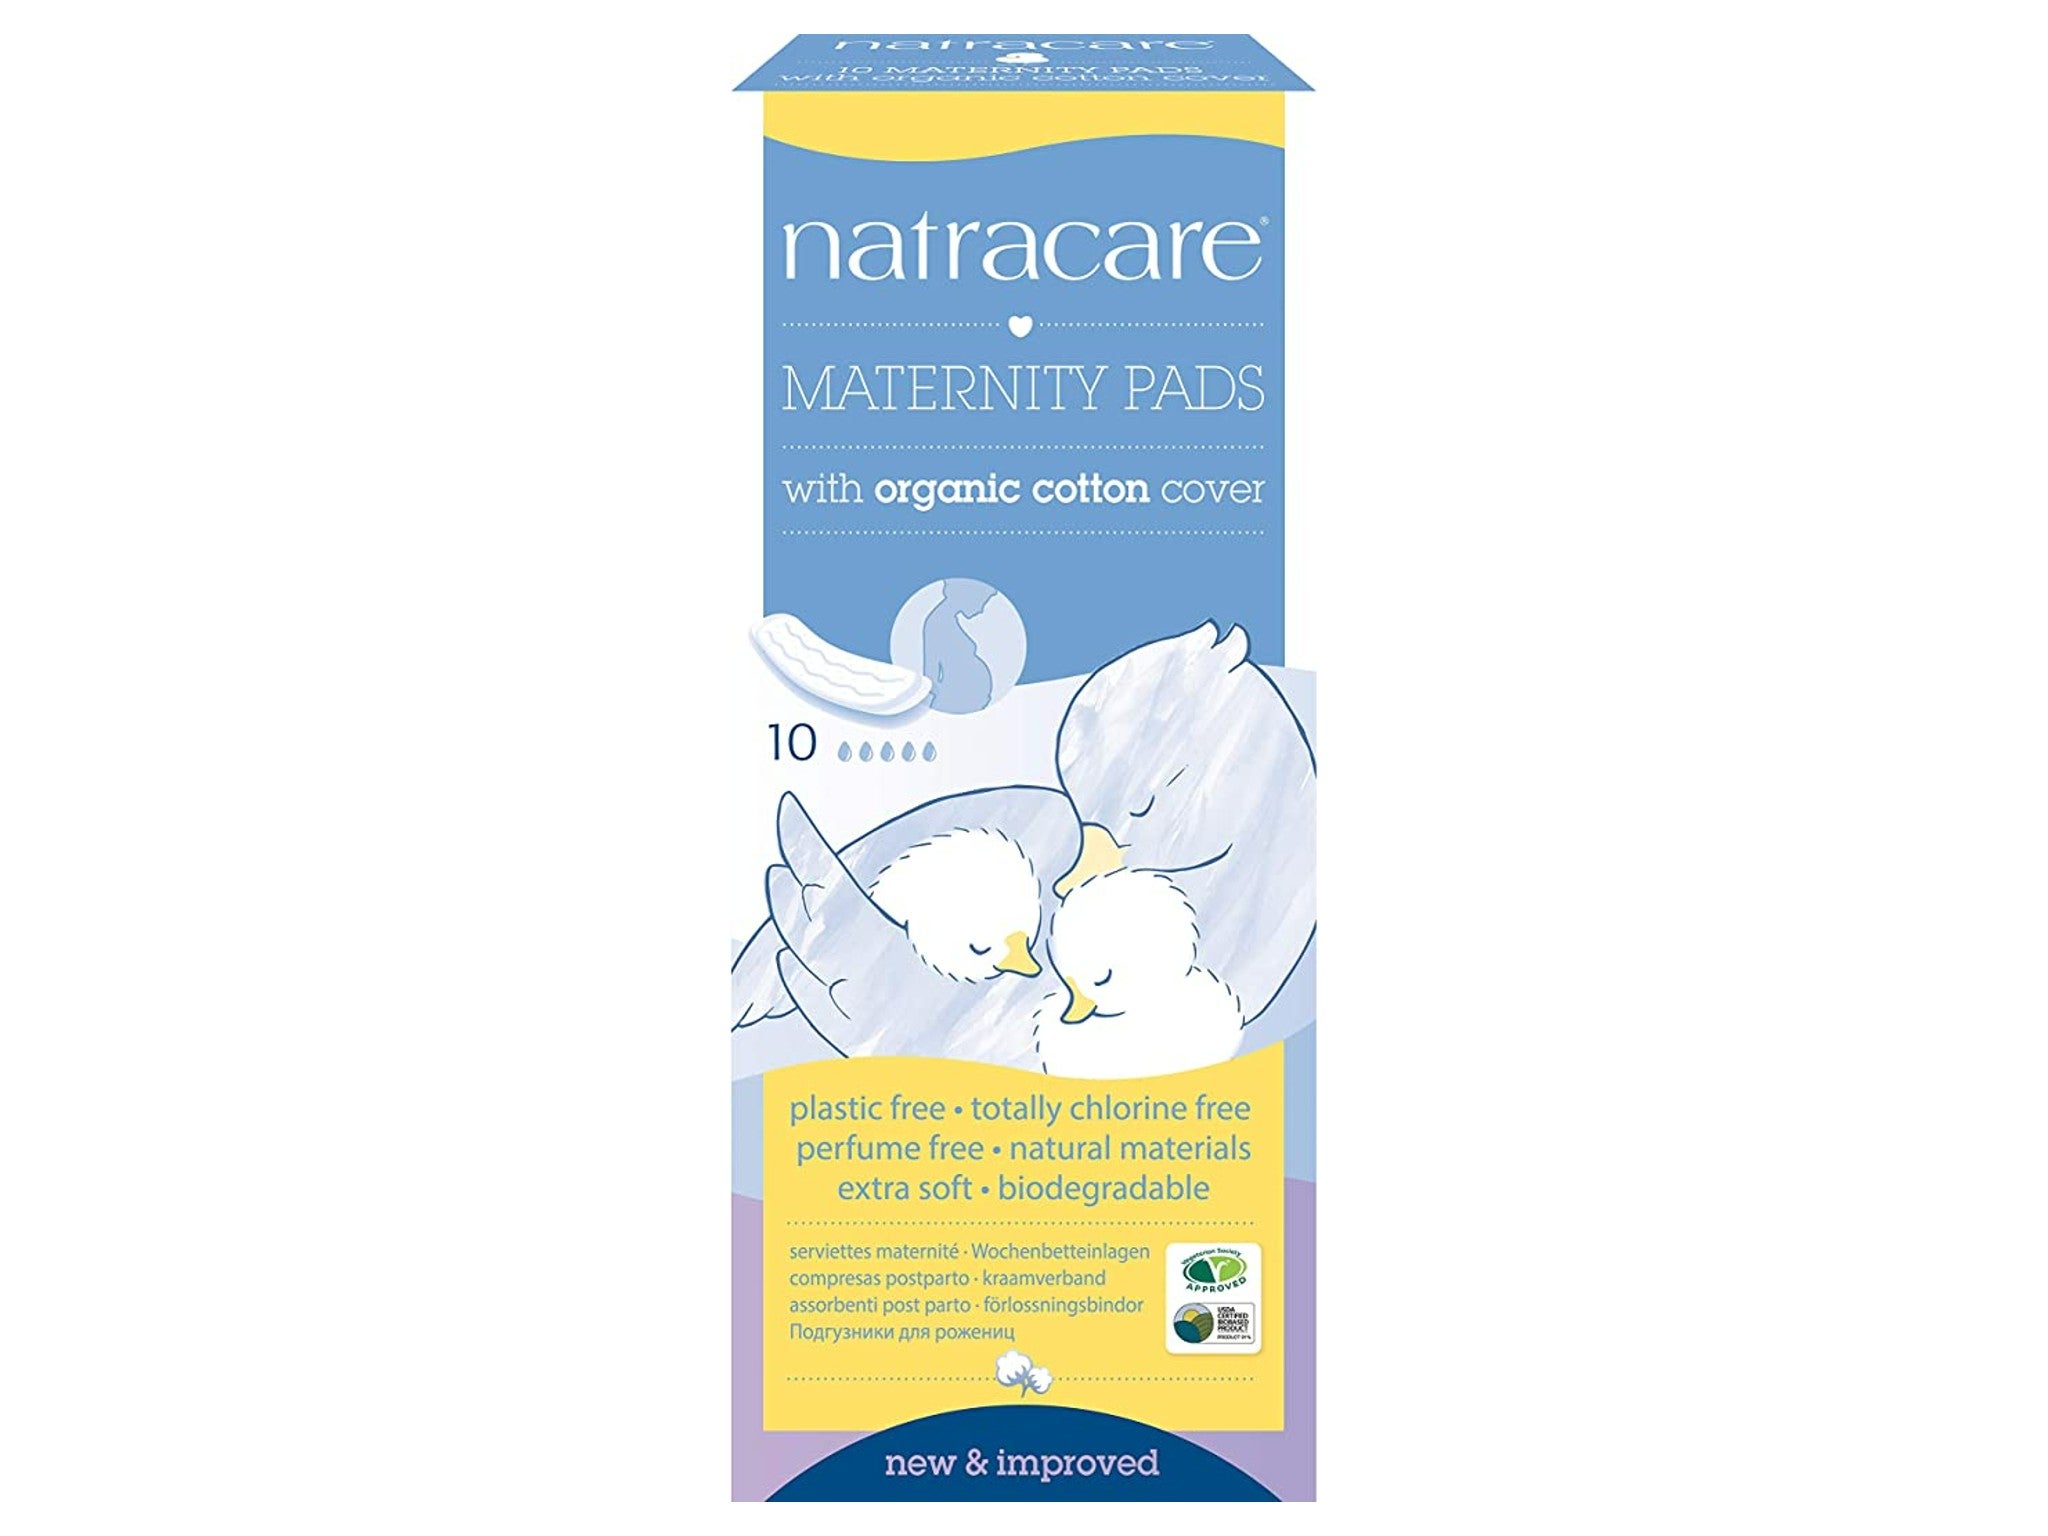 Natracare maternity pads